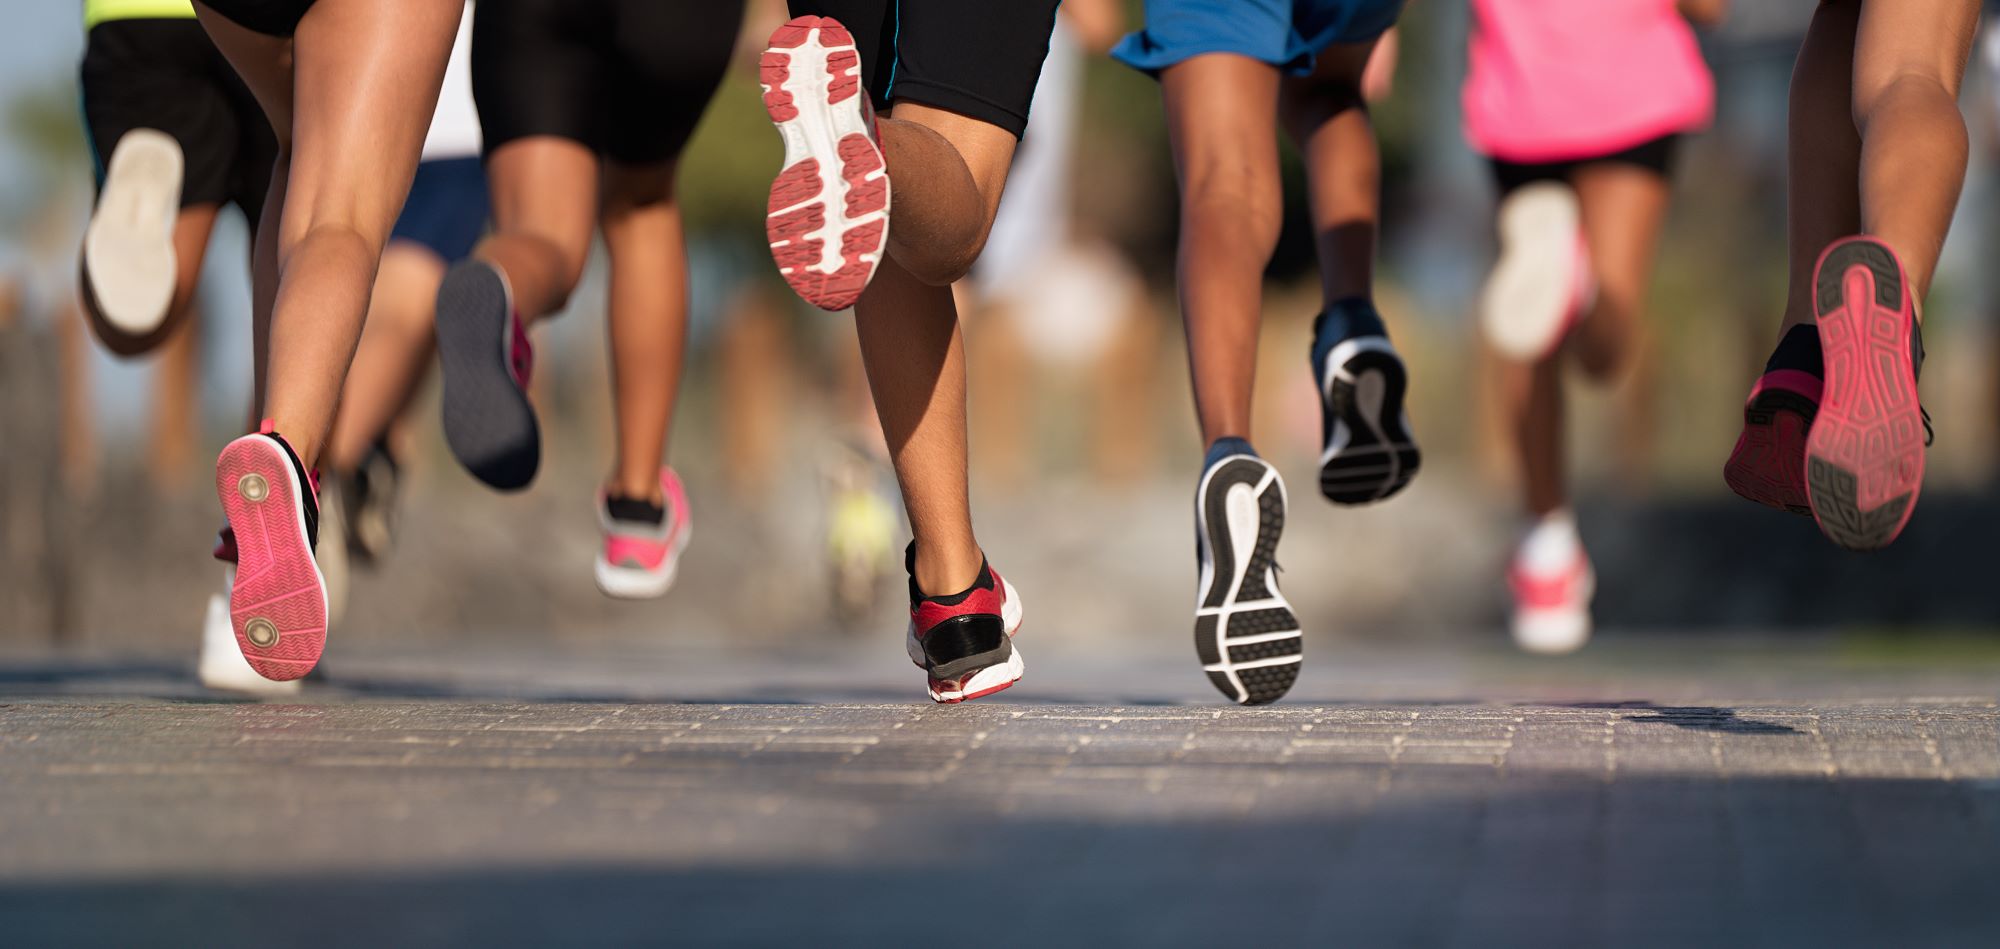 How to choose running shoes for beginners